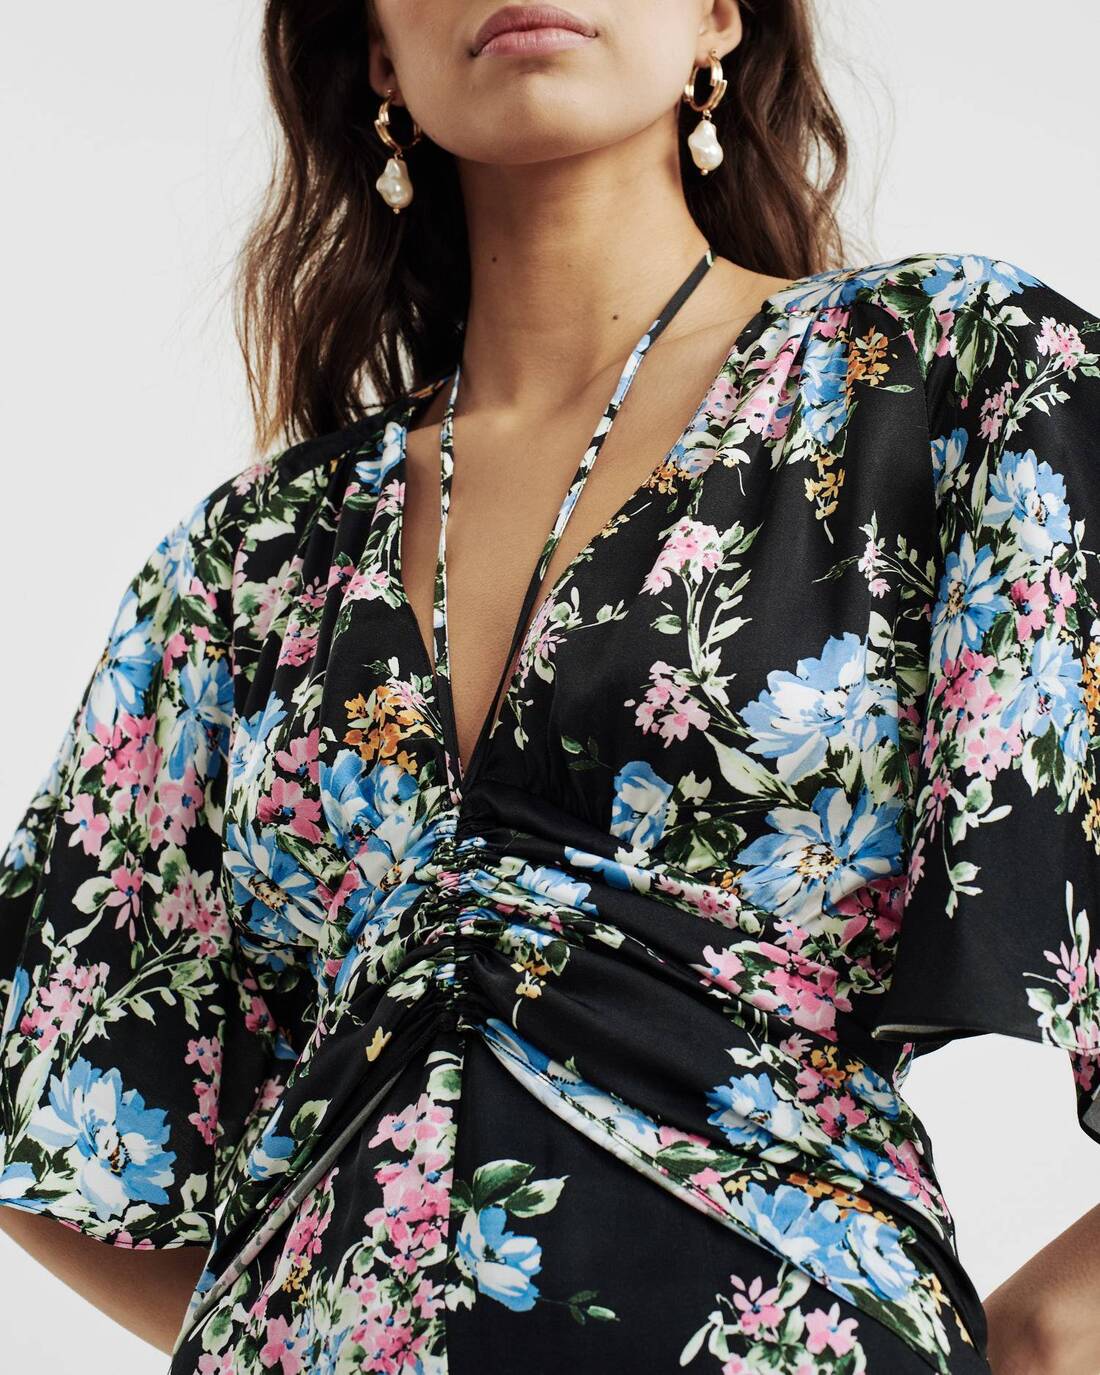 Floral print tea dress with flared sleeves